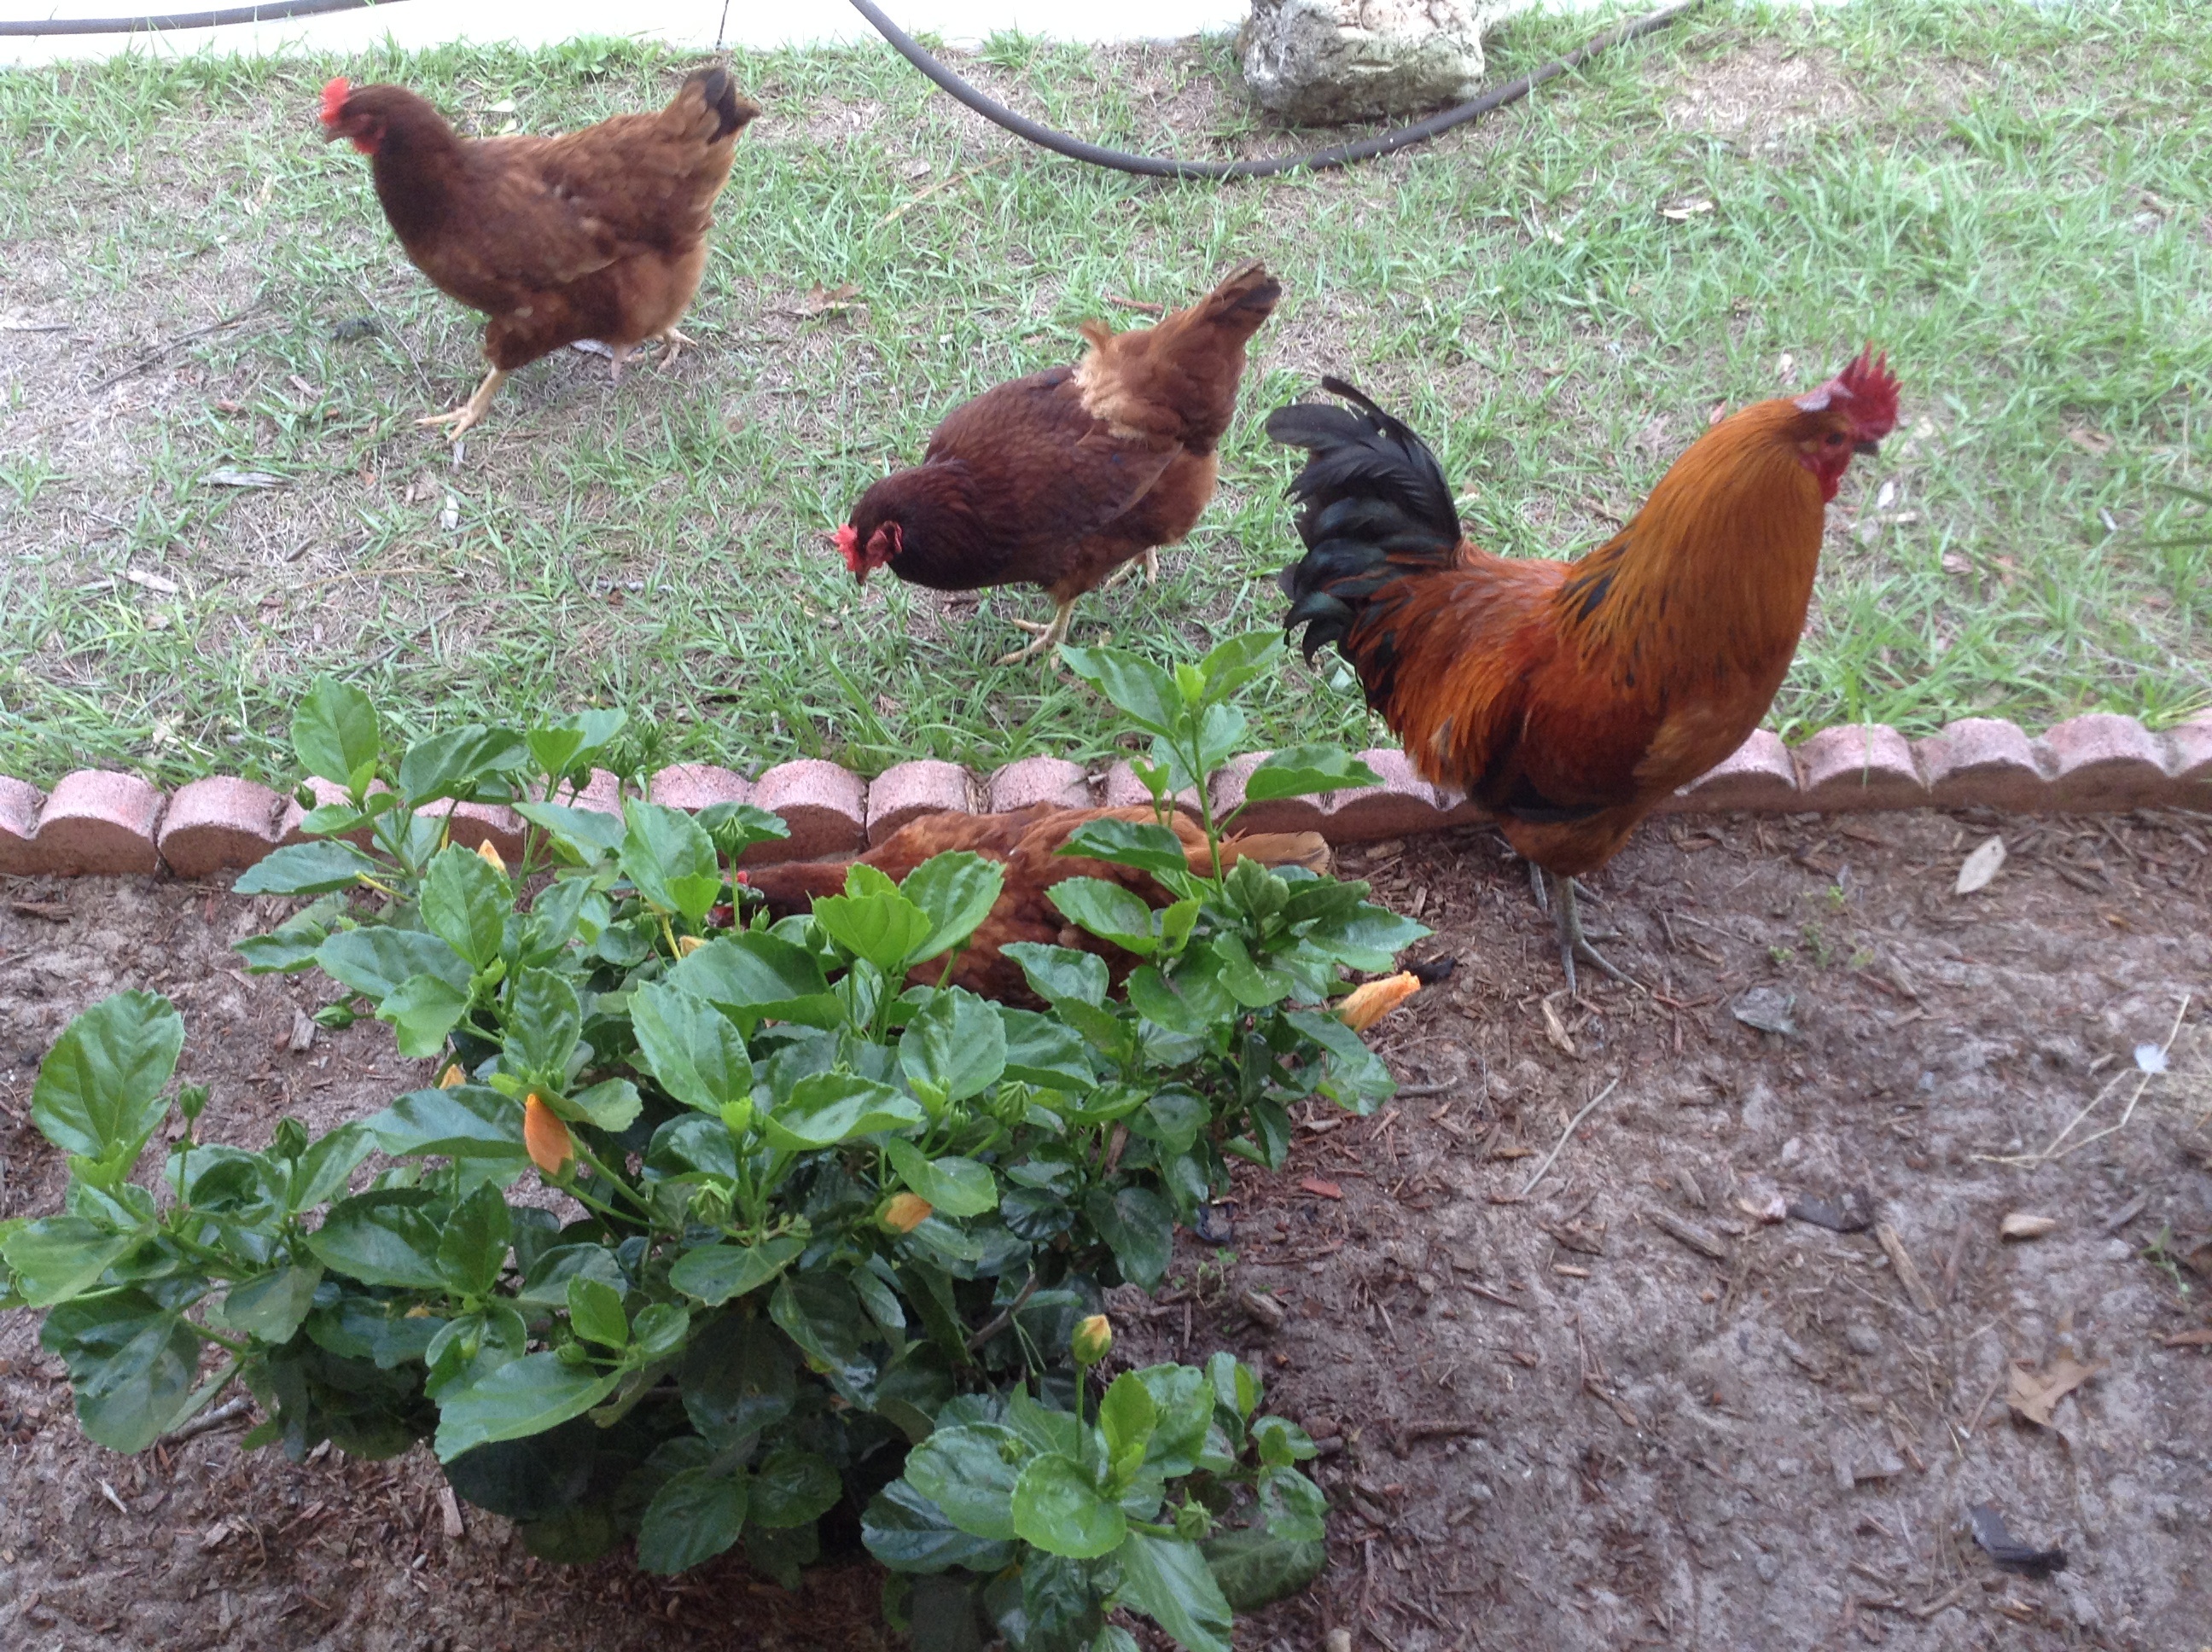 My chickens love to help me clean out flower beds.